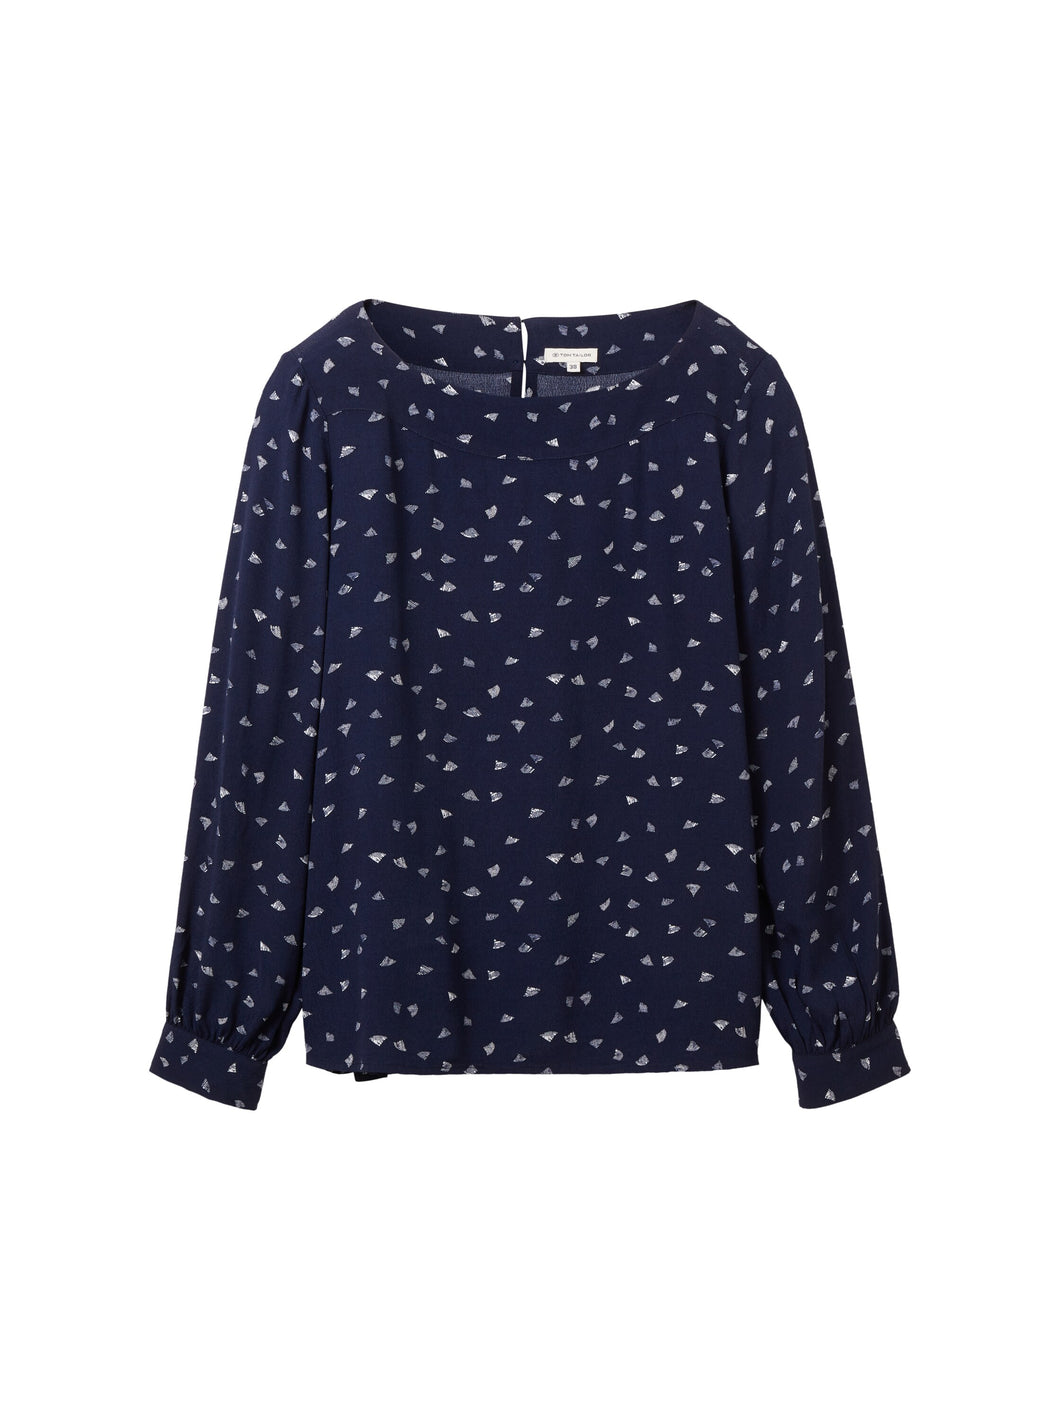 TOM TAILOR PRINTED BLOUSE WITH BOAT NECK navy minimal print